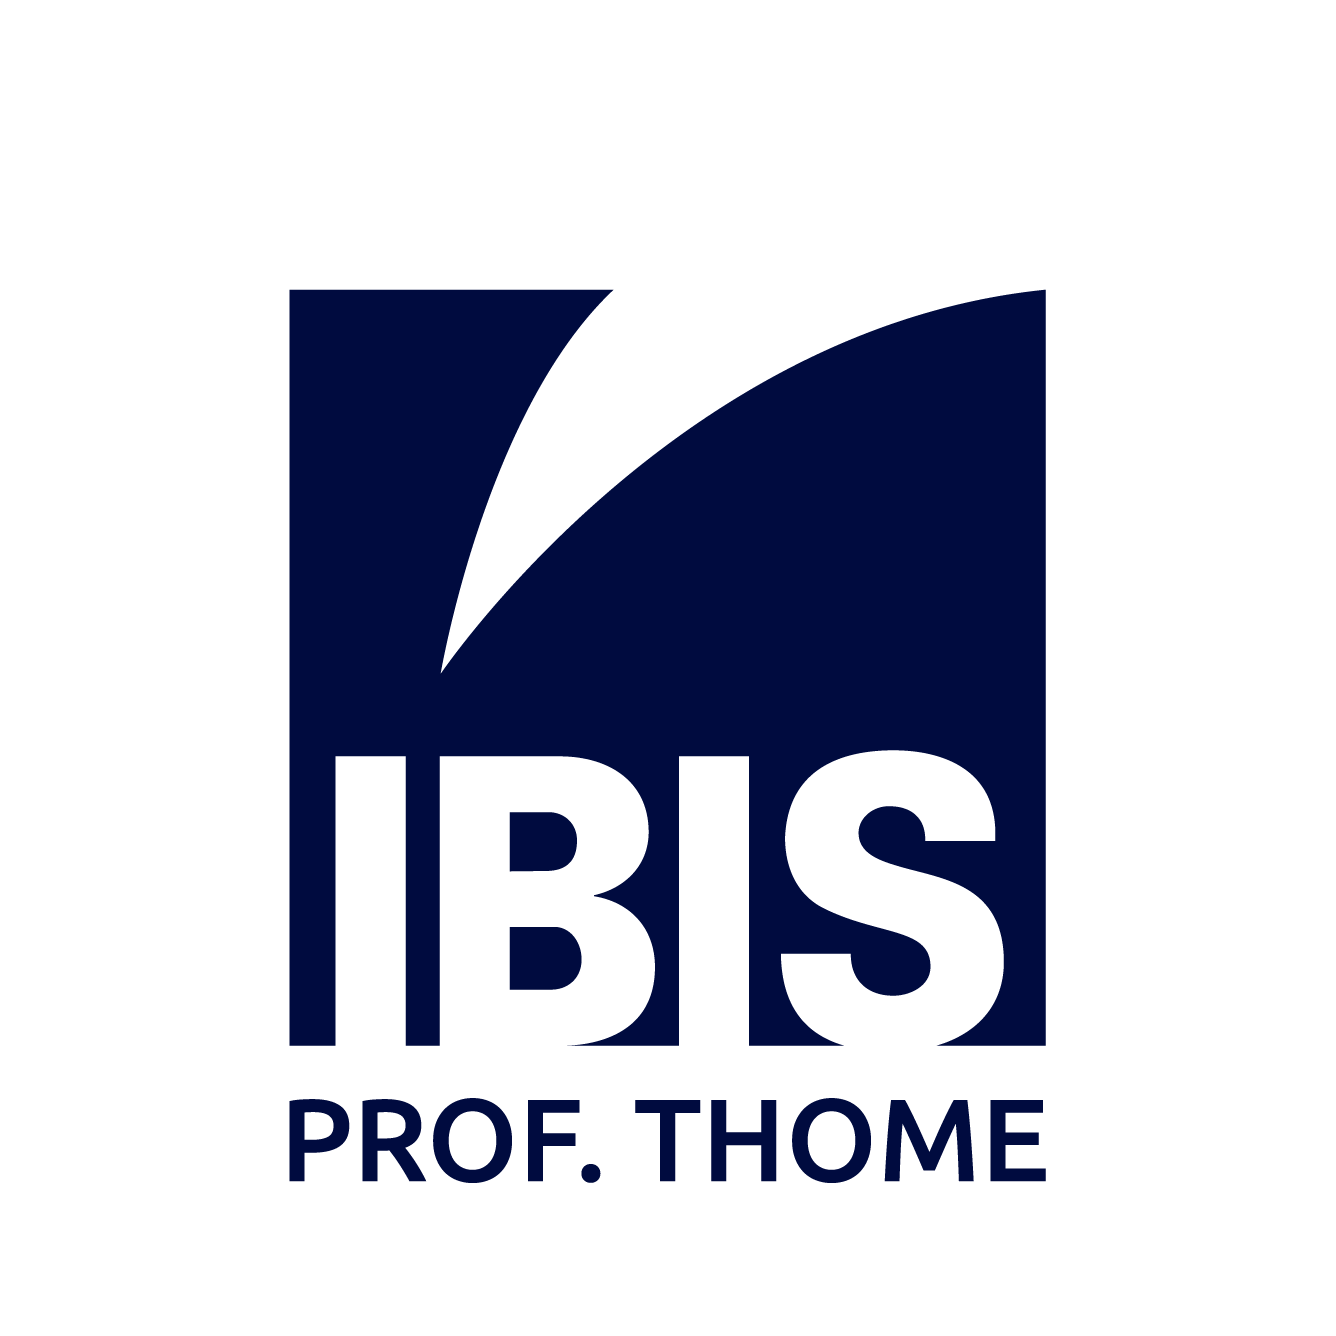 Ibis Logo - Welcome to our website of IBIS America Inc